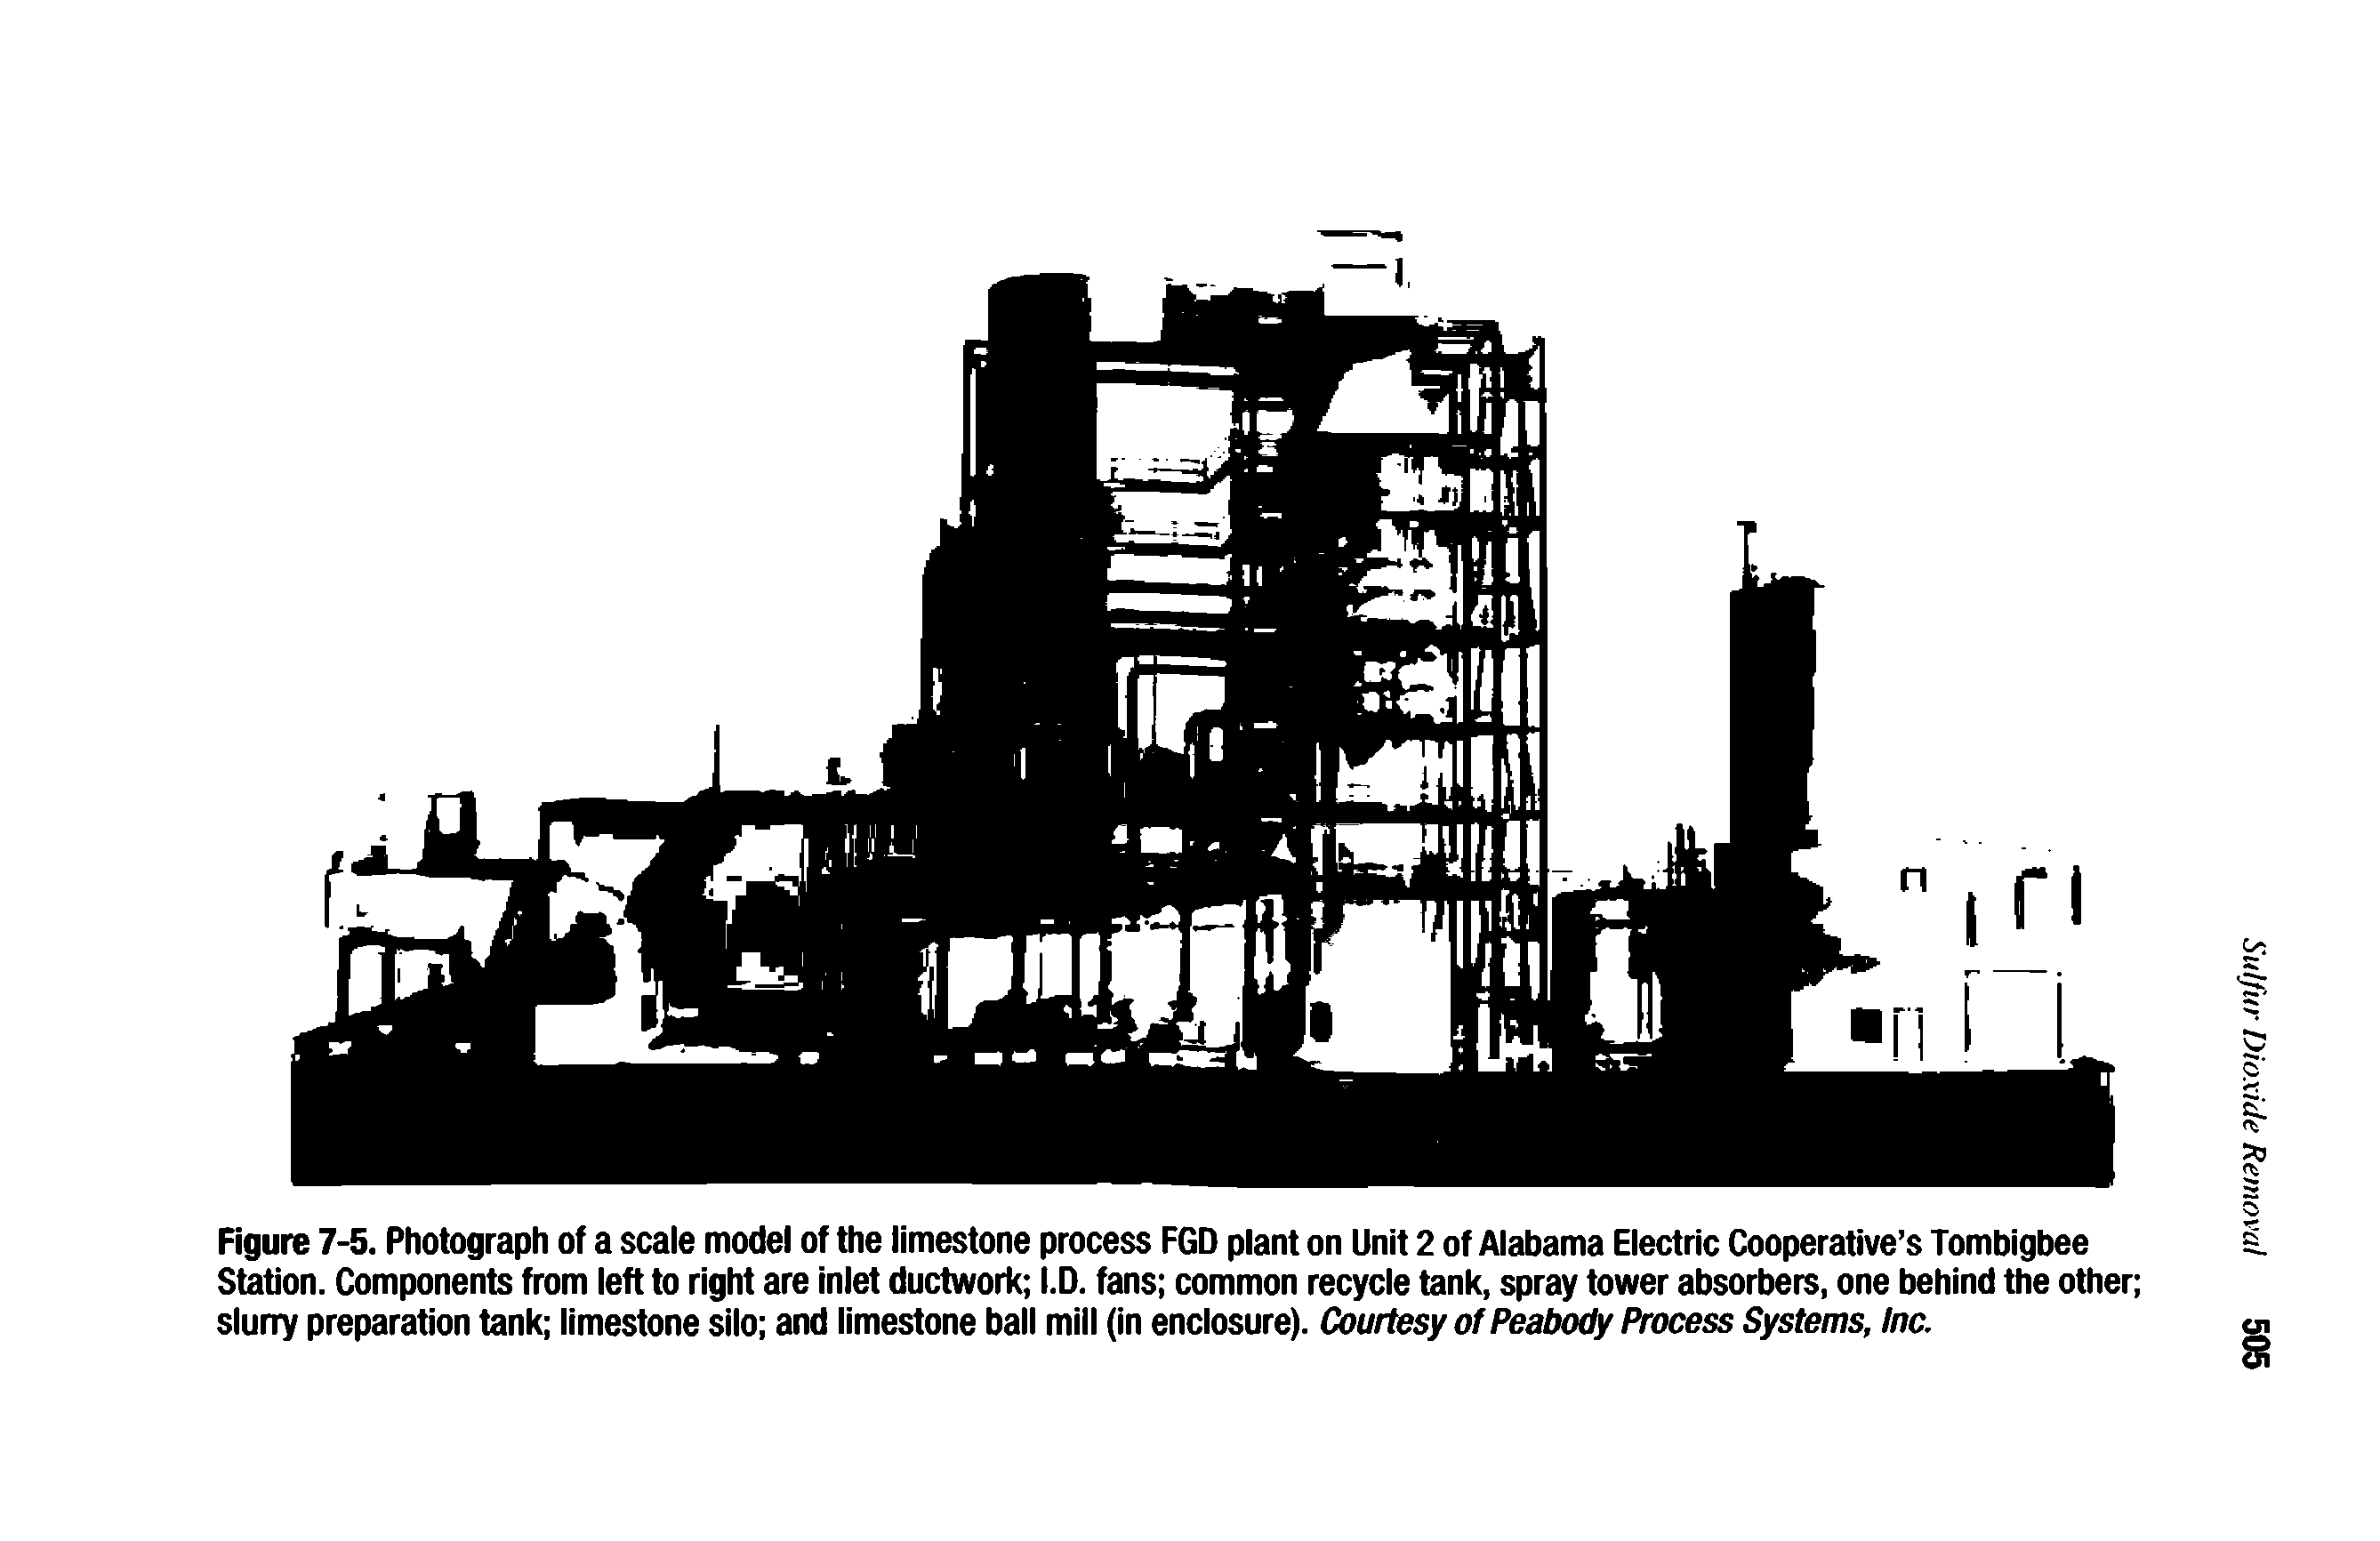 Figure 7-5. Photograph of a scale model of the limestone process FGD plant on Unit 2 of Alabama Electric Cooperative s Tombigbee Station. Components from left to right are inlet ductwork I.D. fans common recycle tank, spray tower absorbers, one behind the other slurry preparation tank limestone silo and limestone ball mill (in enclosure). Courtesy of Peabody Process Systems, tnc.